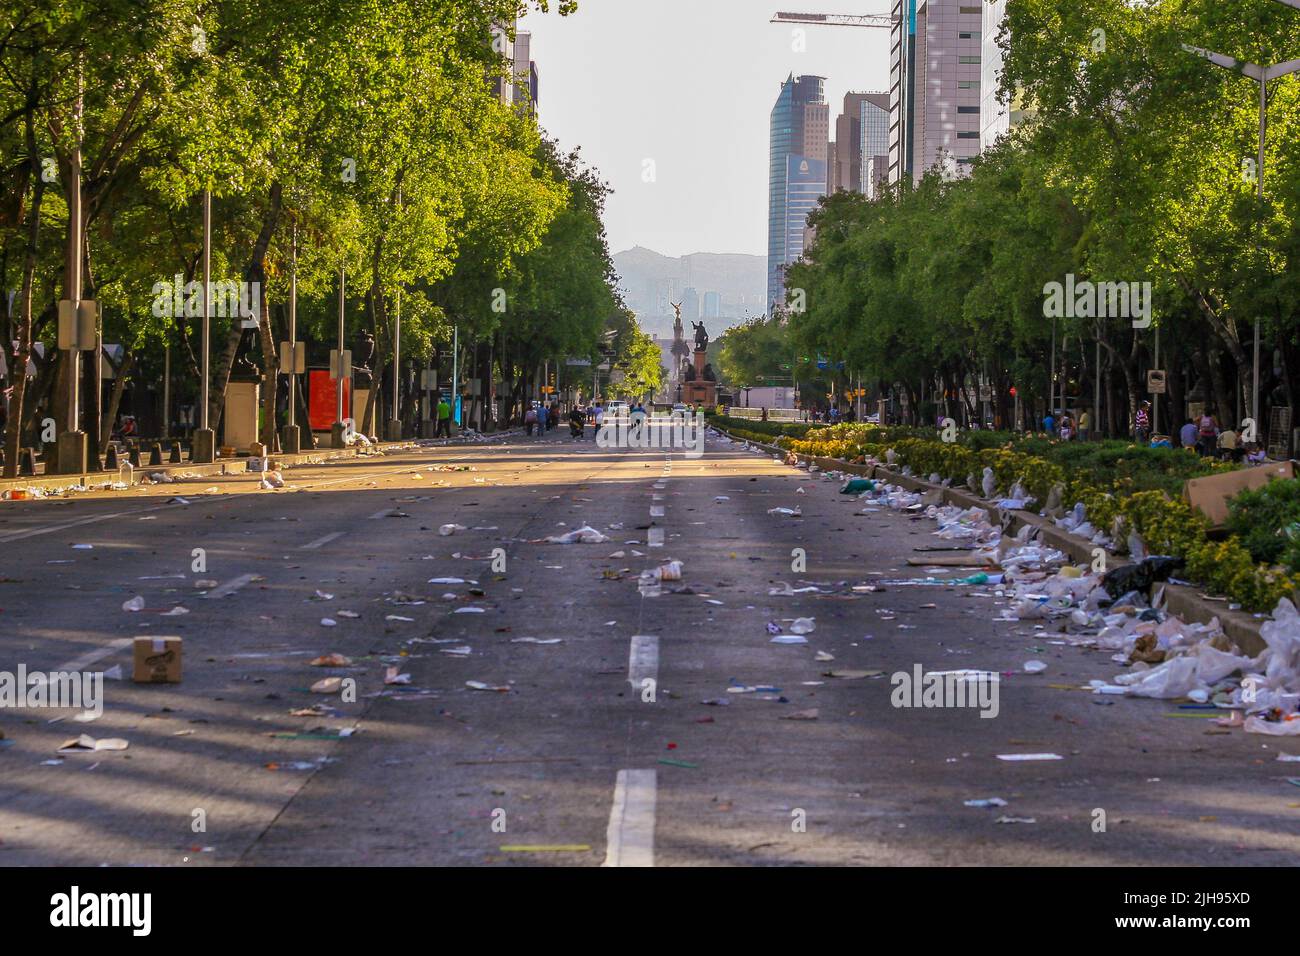 Mexico City - Mexico, 04 26 2010: Trash left on the streets after a festival on Reforma Avenue in Mexico City Stock Photo